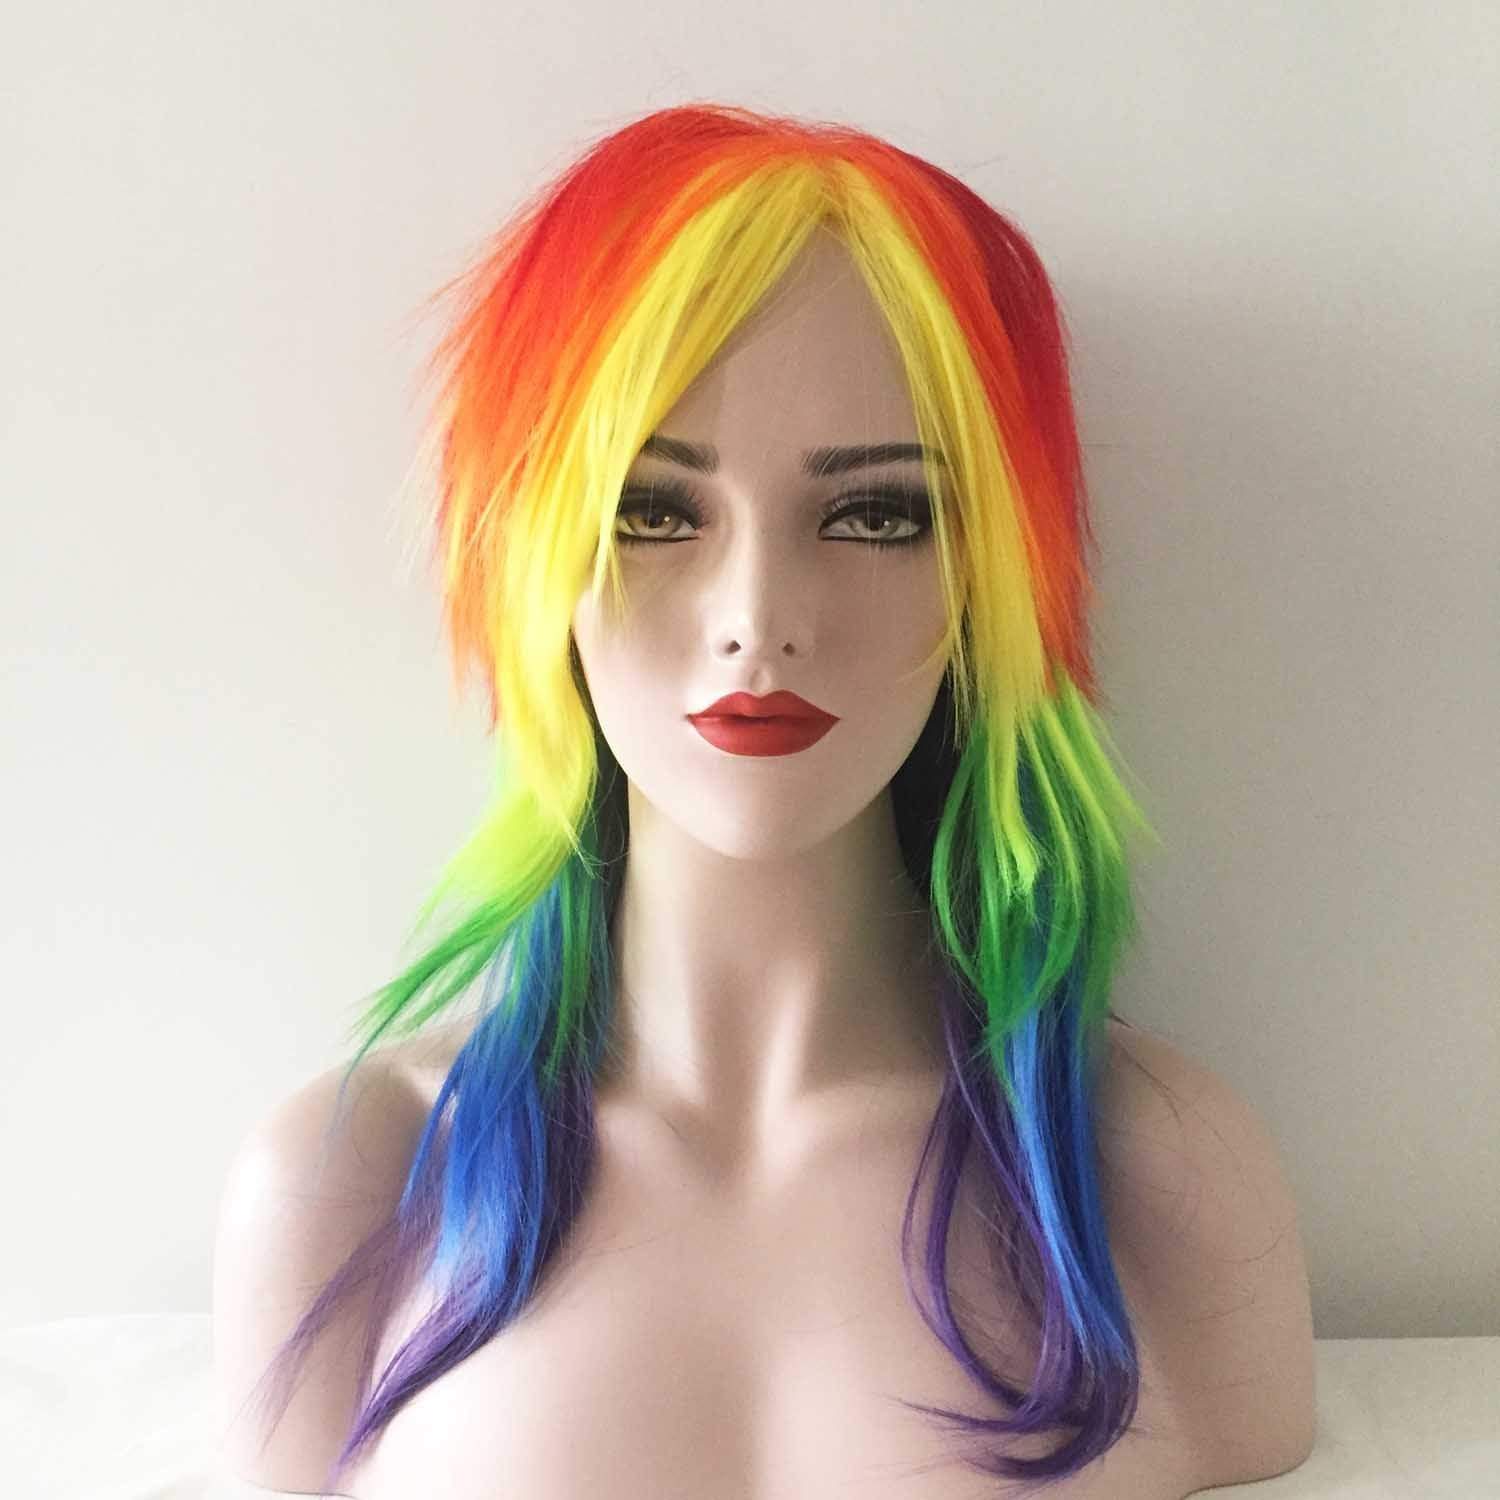 nevermindyrhead Women Rainbow Colors Long Straight Fringe Bangs Layered Party Wig